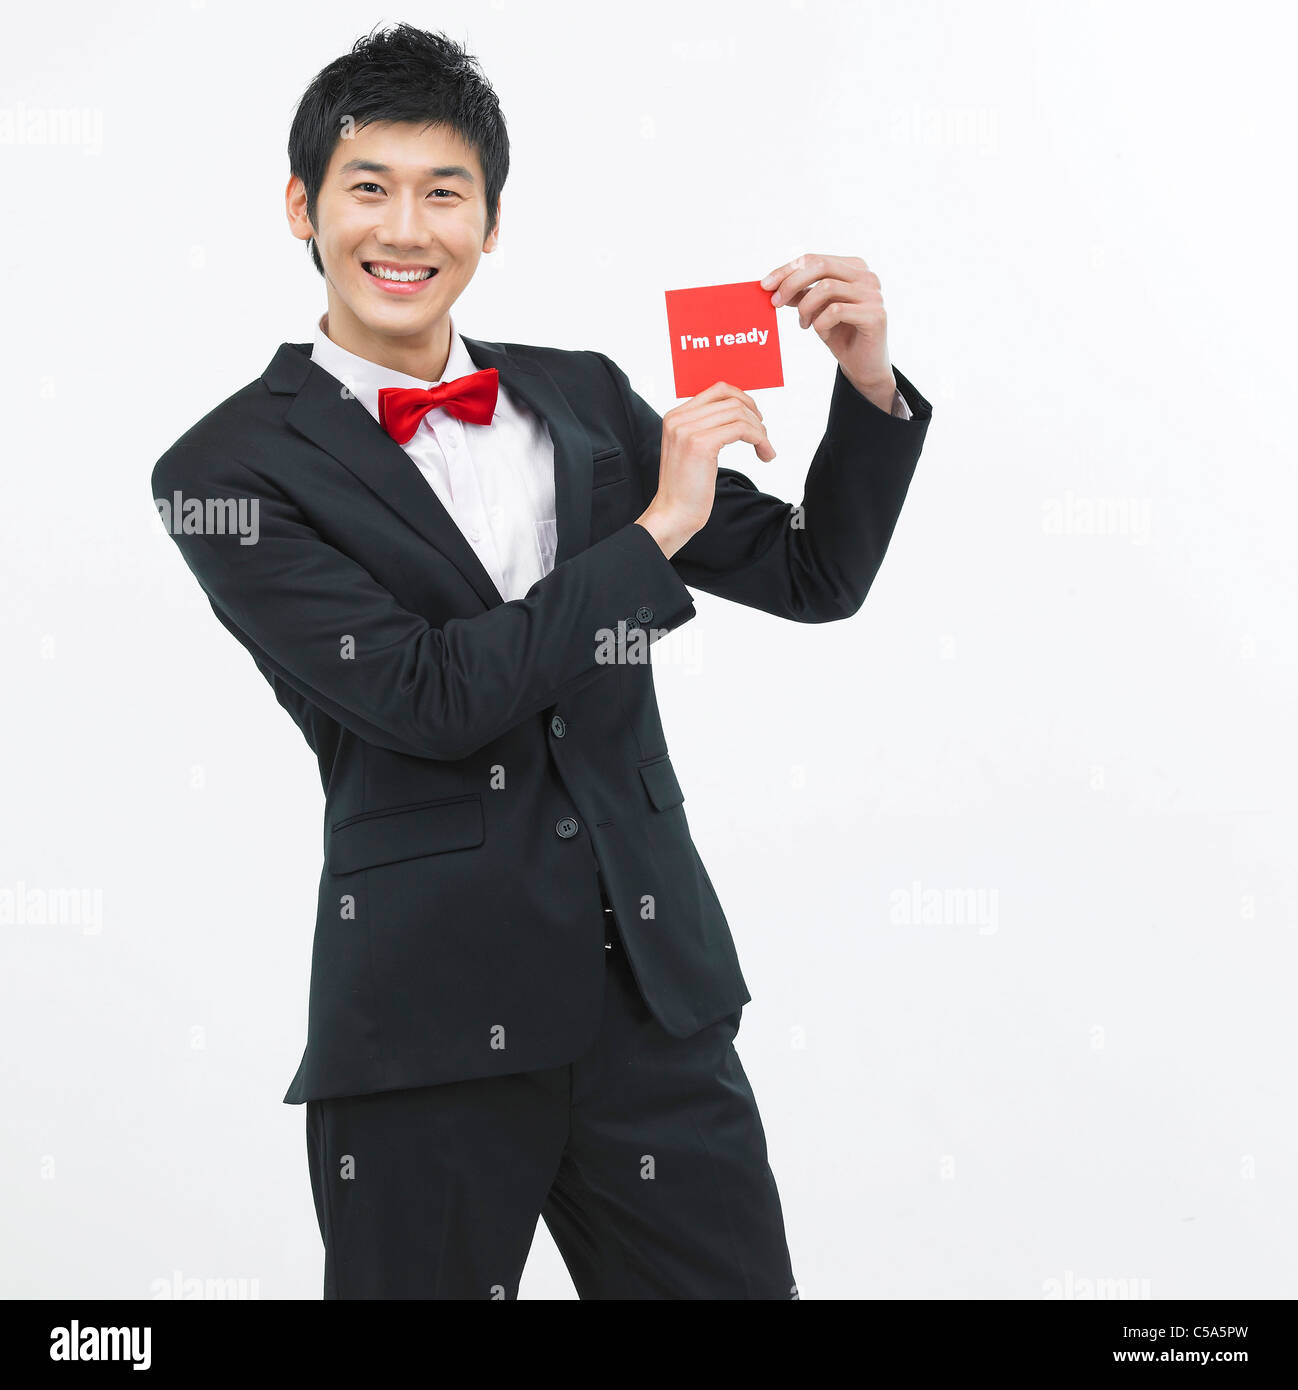 Portrait of young man holding card Banque D'Images